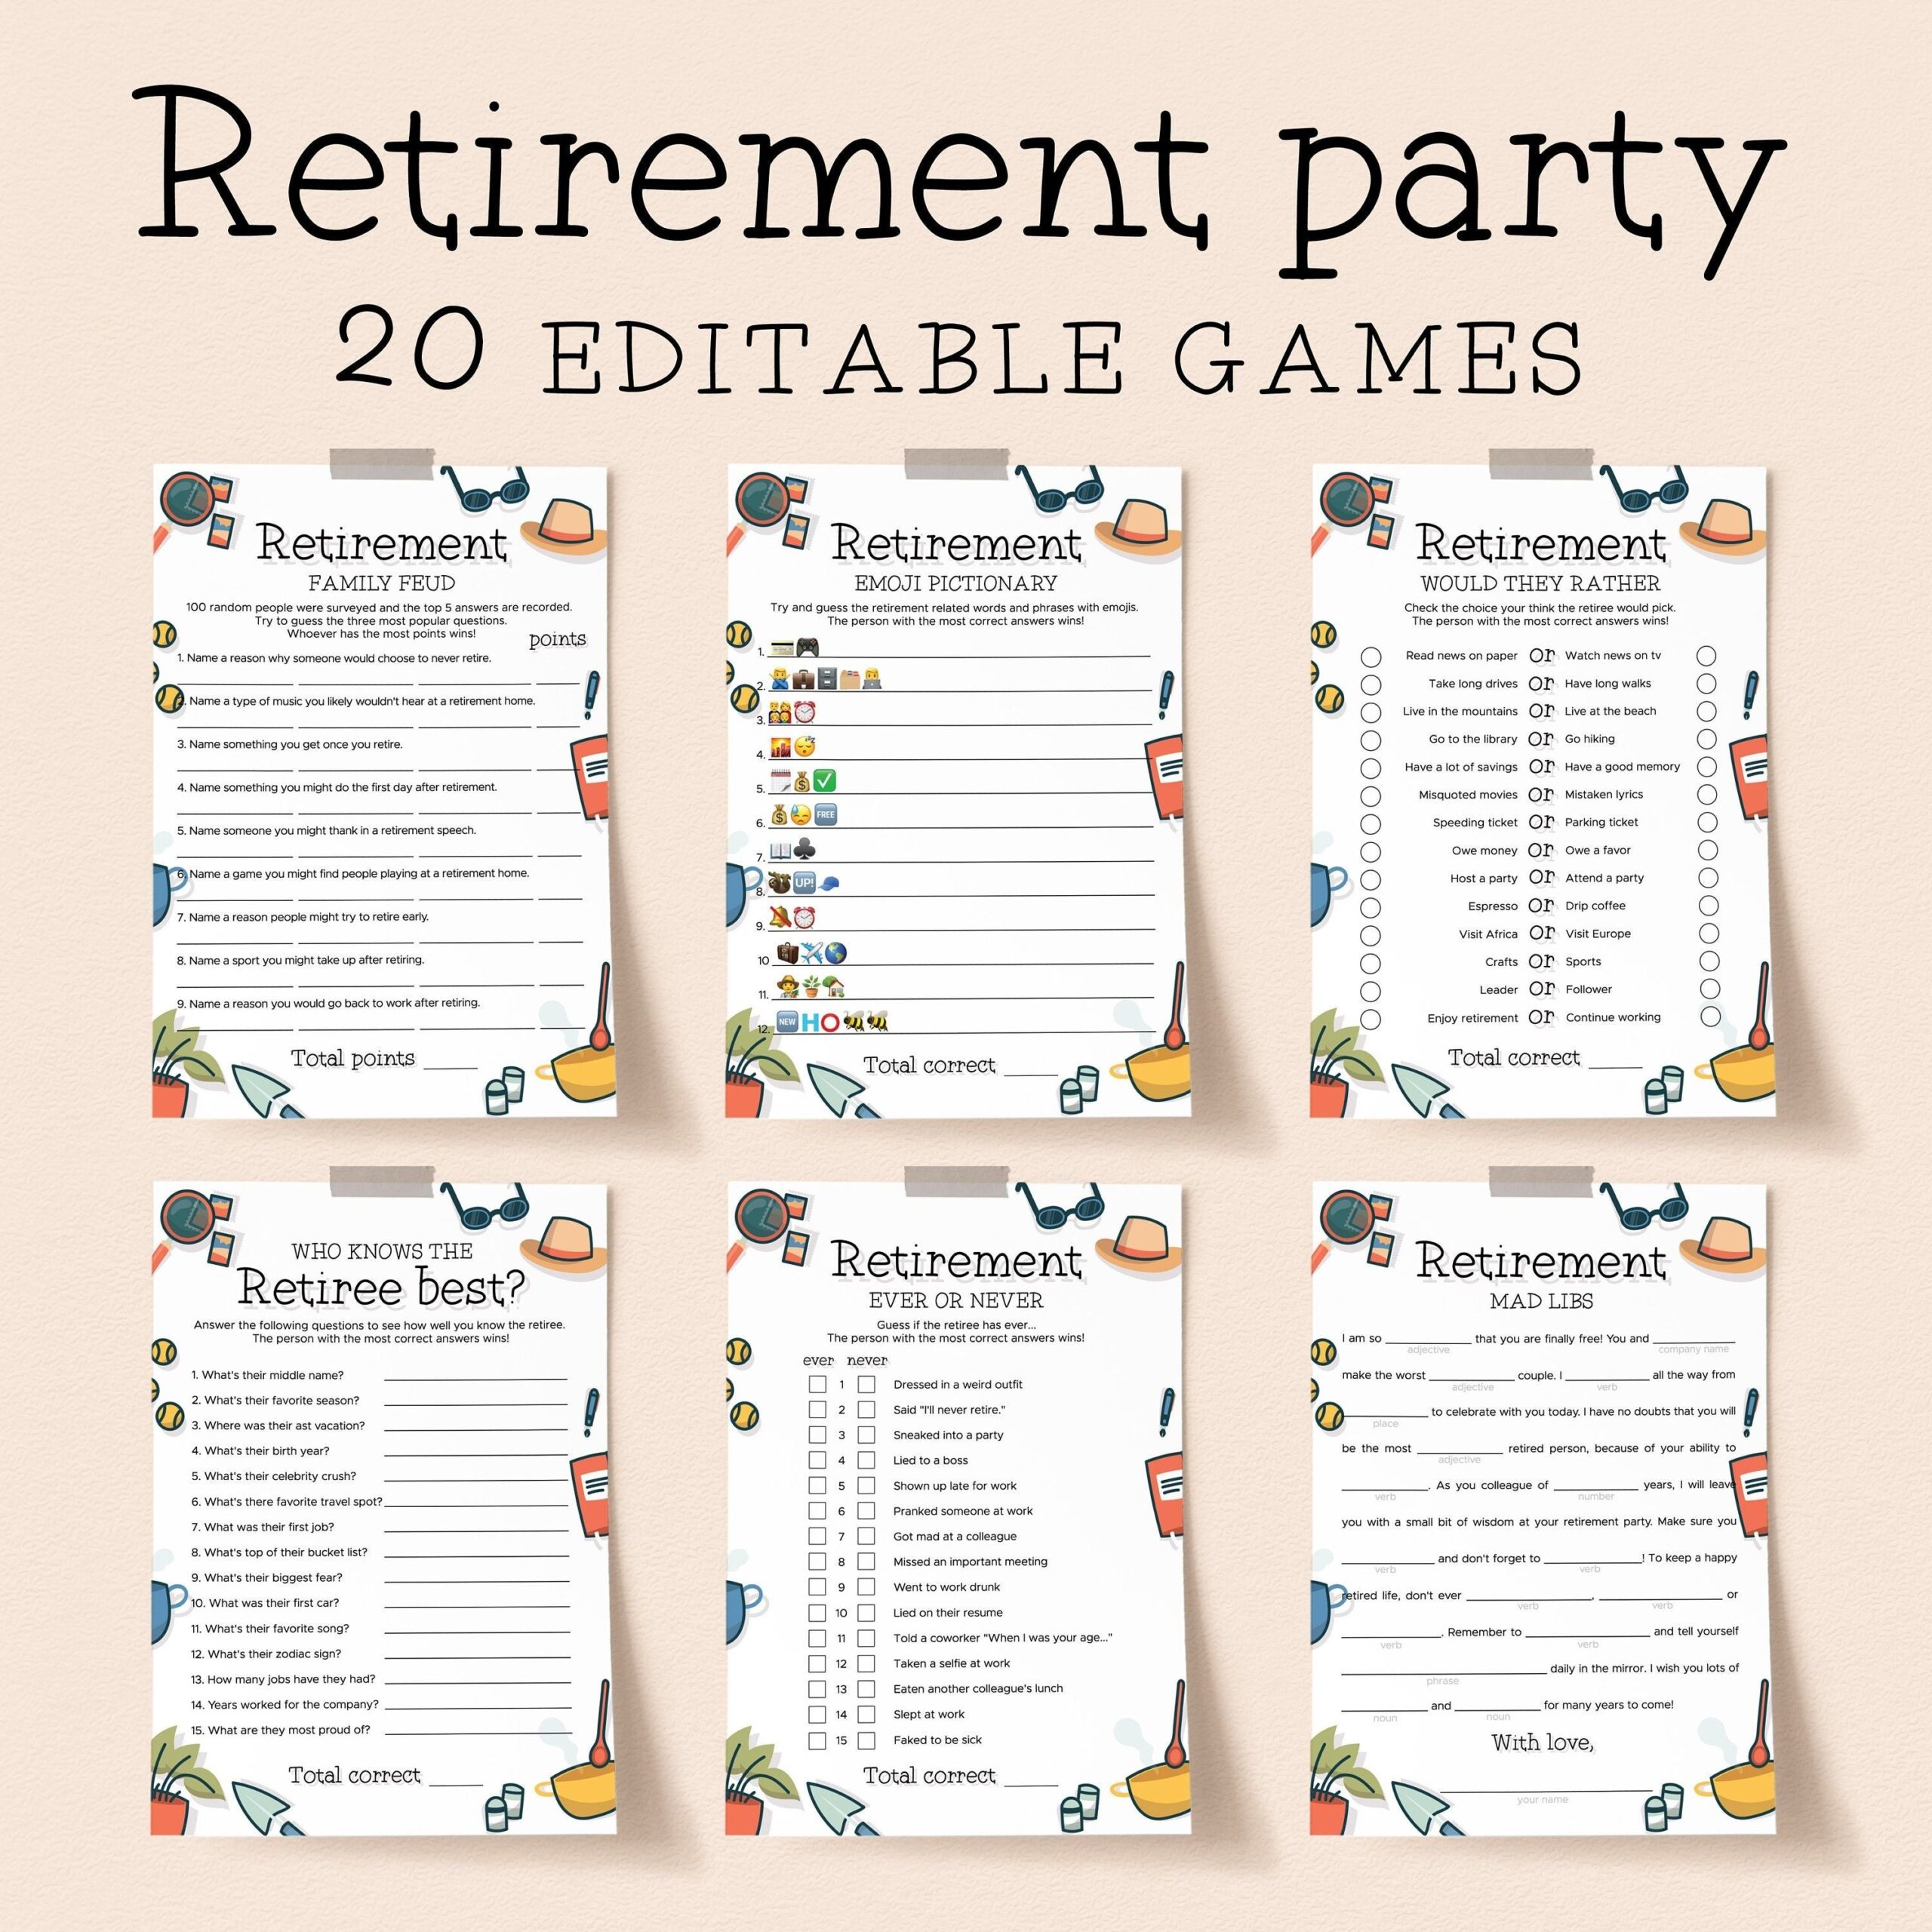 Retirement Games For Him And Her Printable Activities For The Retiree Fun Office Party Ideas For Groups Co worker Advice And Wishes PDF NH1 Etsy Printable Activities How To Memorize Things 